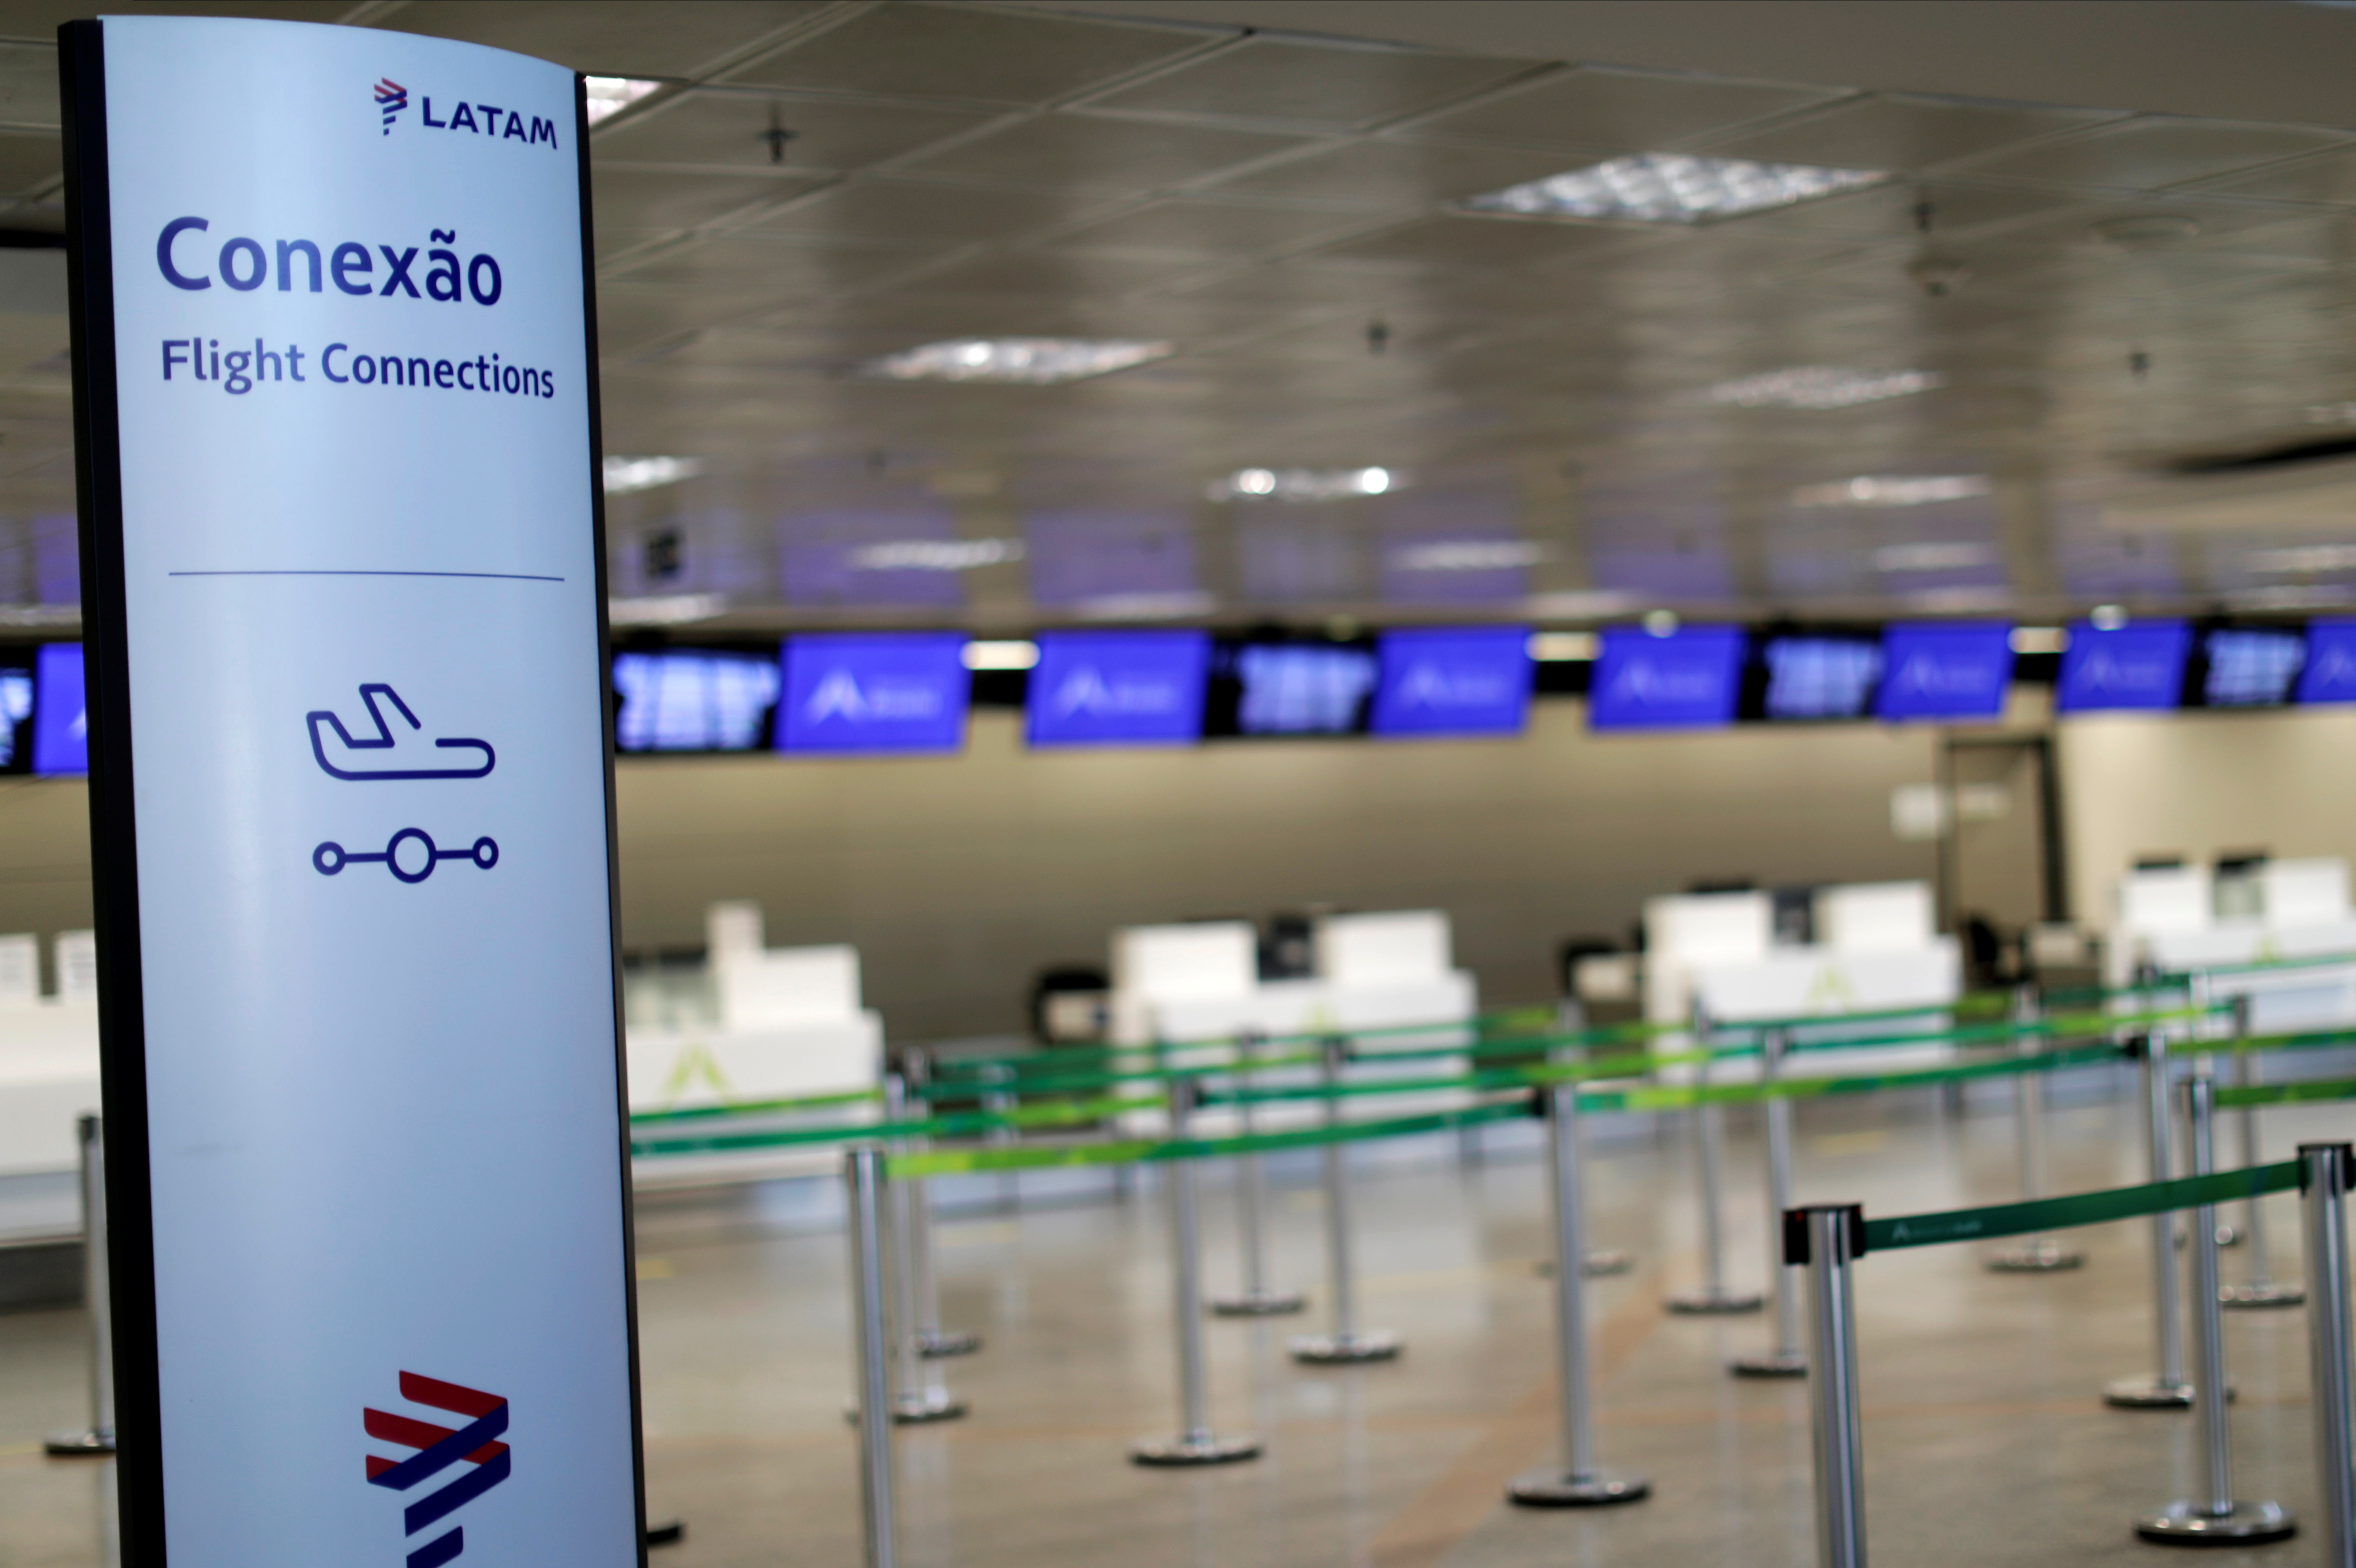 A banner of Latam Airlines is seen next to empty check-in counters in Brasilia International Airport as air traffic is affected by the outbreak of the coronavirus disease (COVID-19), in Brasilia, Brazil May 28, 2020. REUTERS/Ueslei Marcelino